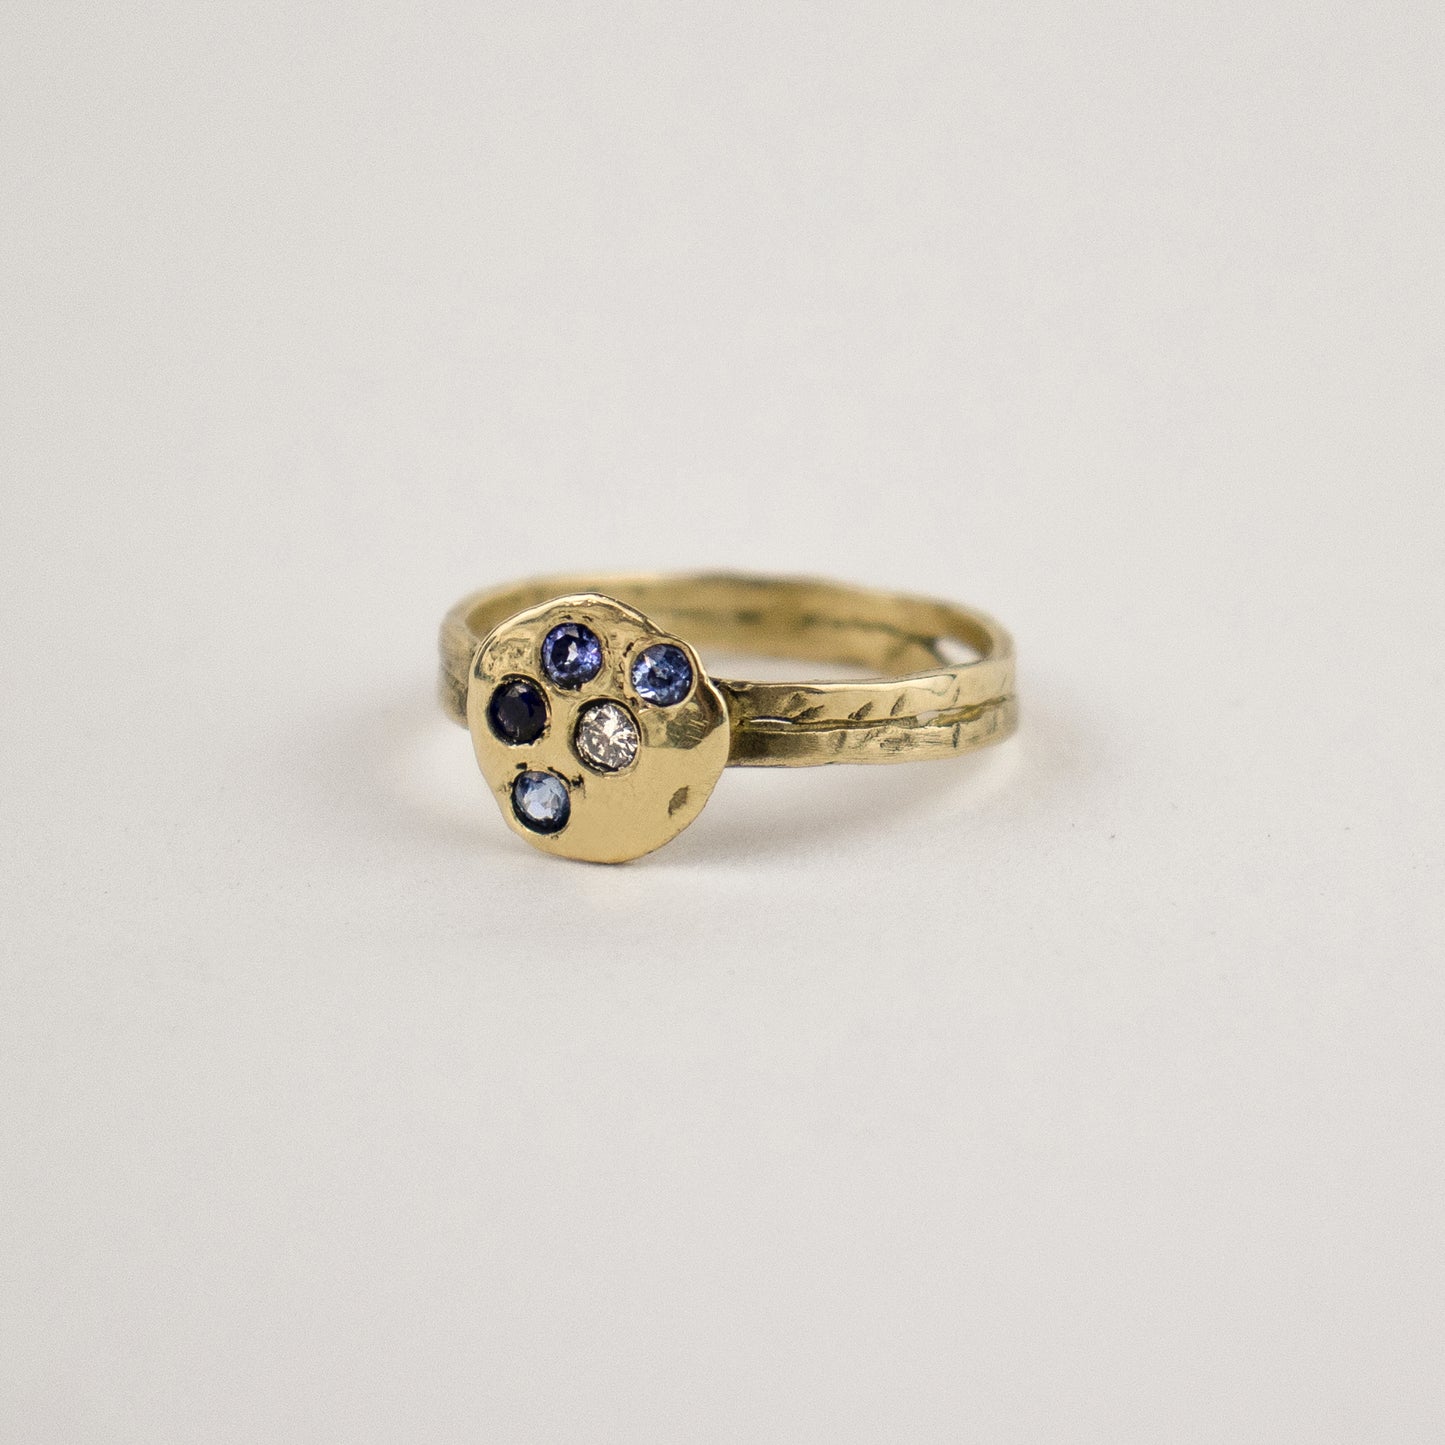 Solid reclaimed 14k gold hammer-finished Maine rock ring set with four 2 mm sapphires and one 2 mm diamond with ring face 0.5 inch in diameter. Handmade and finished in our Catskills store-studio.